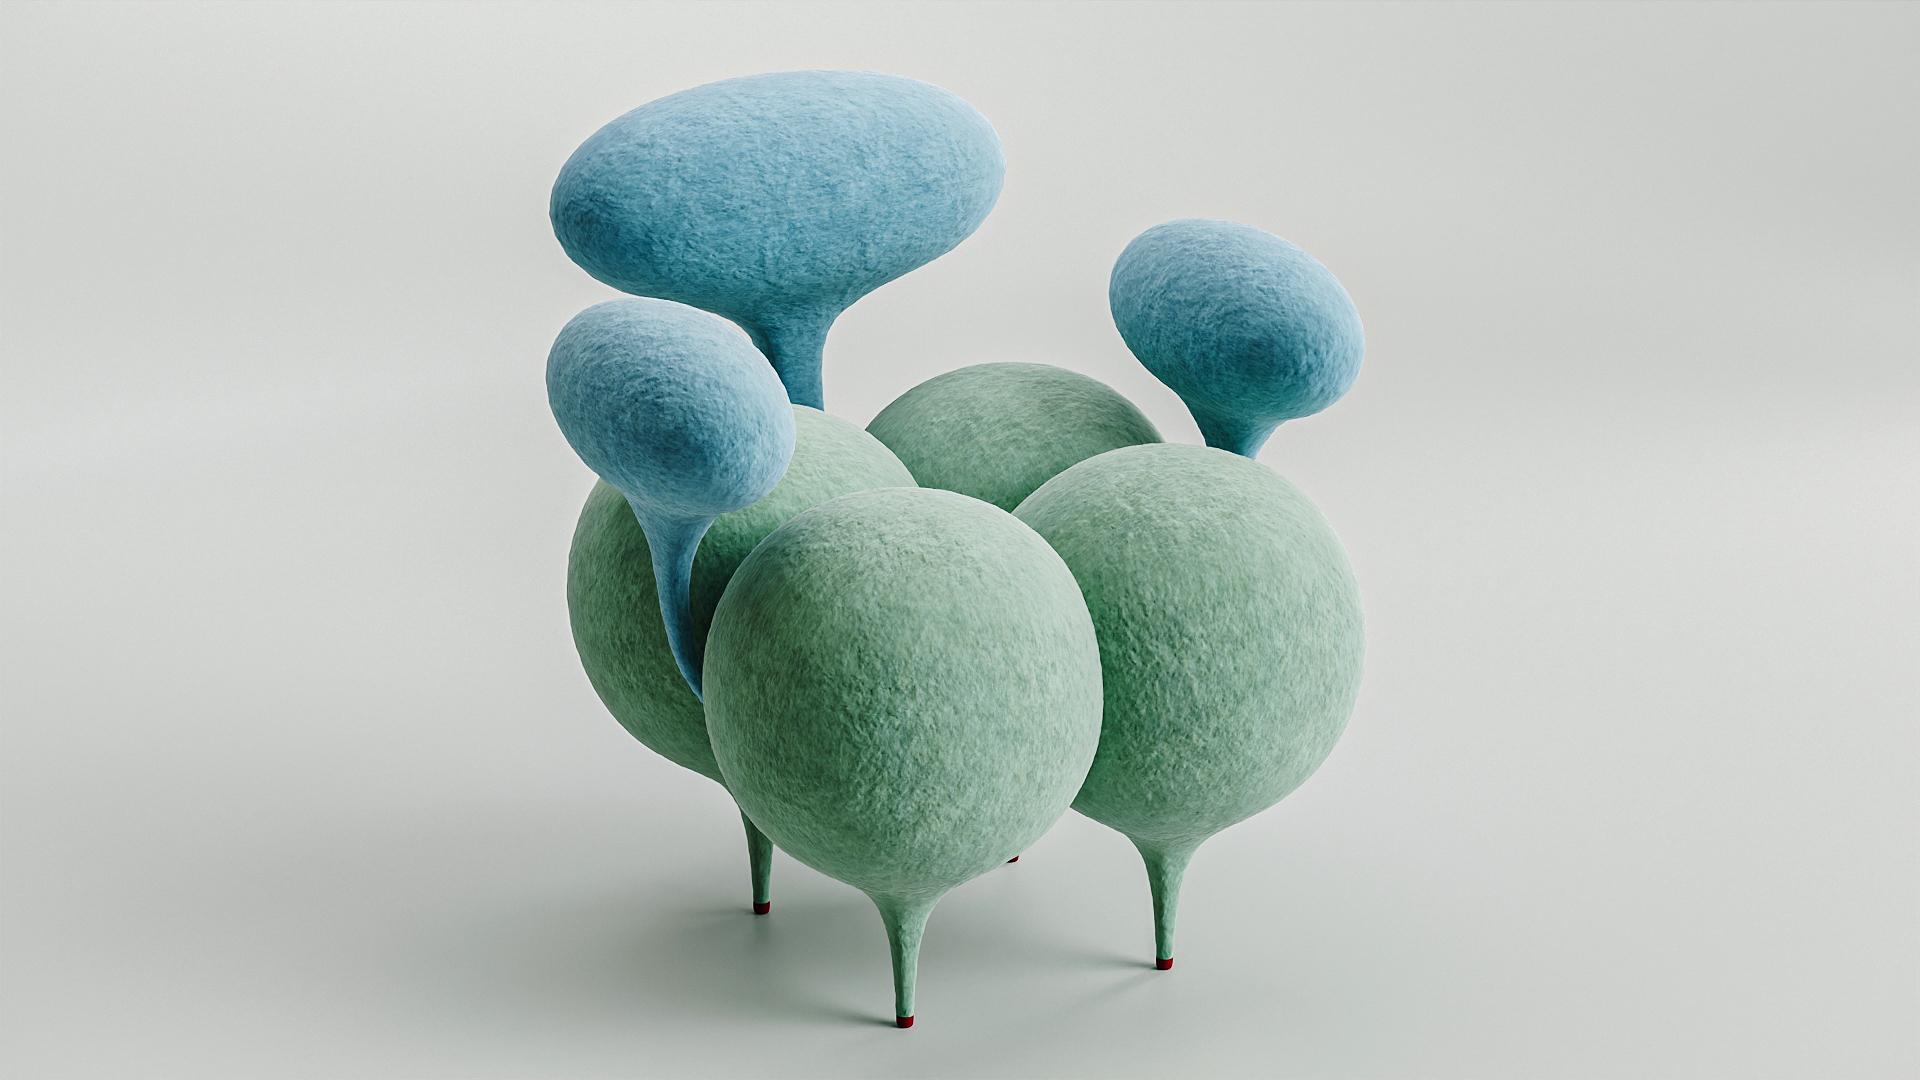 Inflated Ass Chair by Taras Yoom
Limited Edition of 50
Dimensions: D 85 x W 92 x H 83 cm
Materials: Metal, PU, felt, fabric.

The chair is made of a metal frame and medium hardness polypropylene. At the top the entire structure is done over with